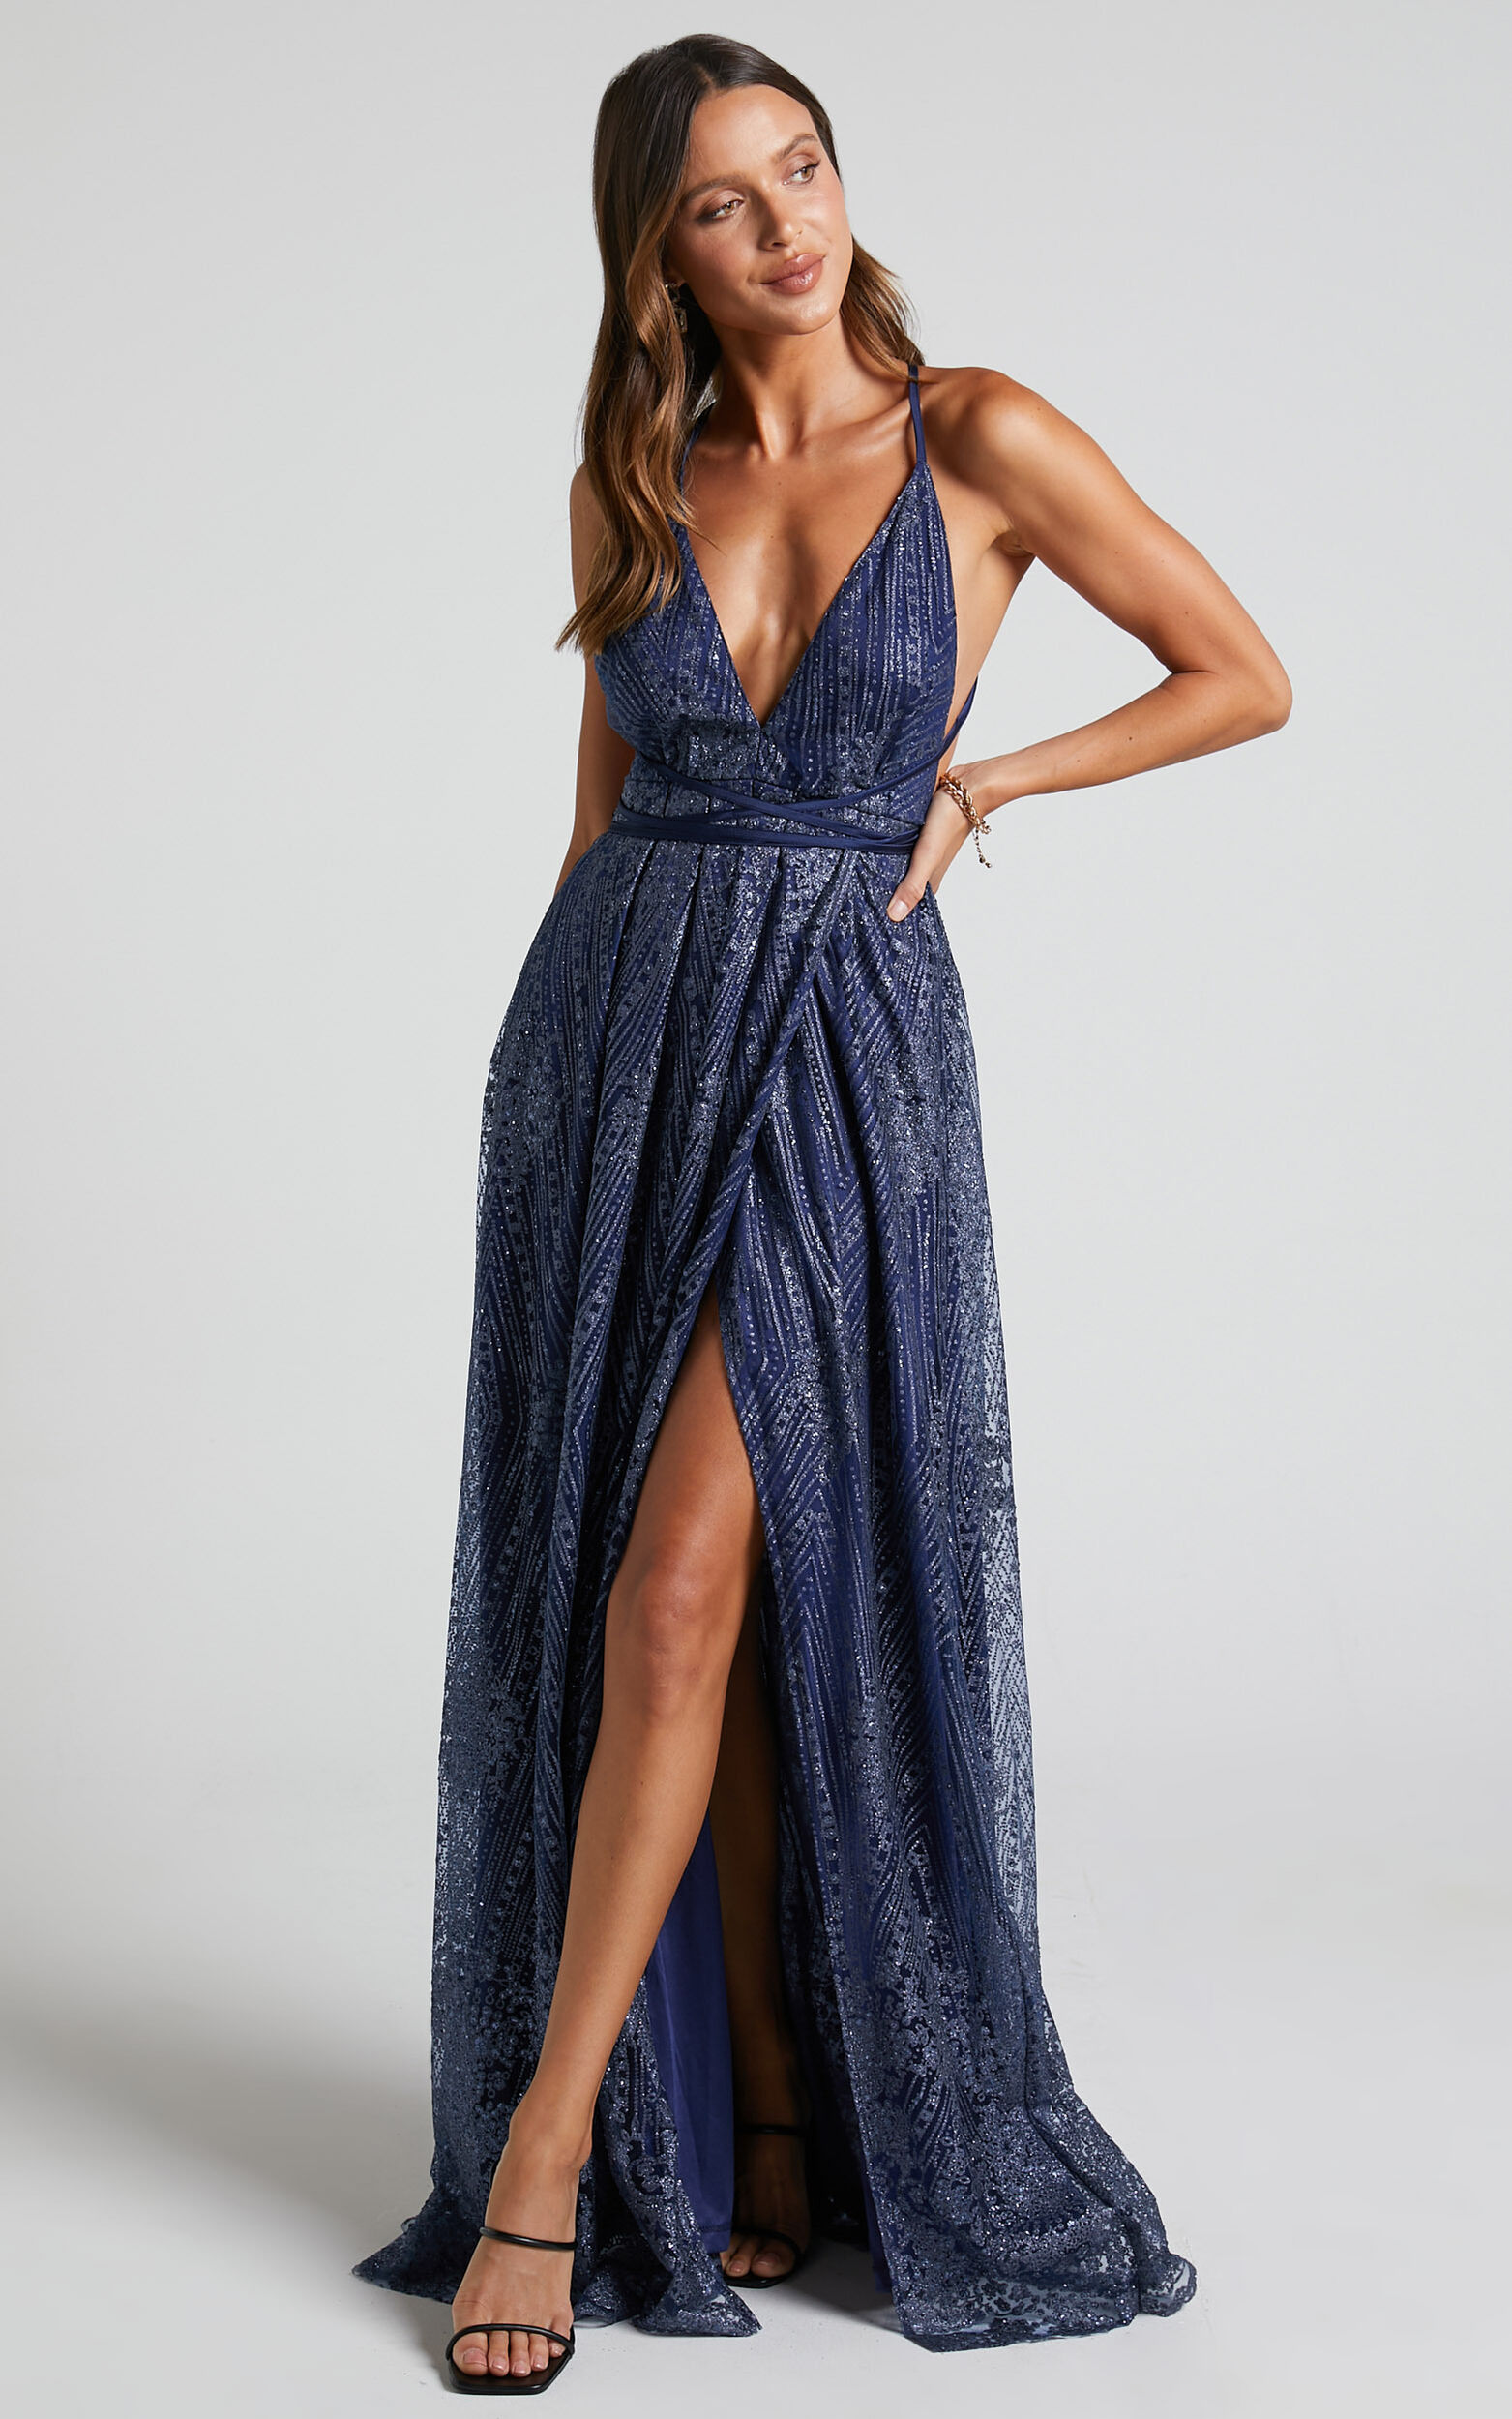 New York Nights Maxi Dress - Plunge Cross Back Dress in Navy - 04, NVY1